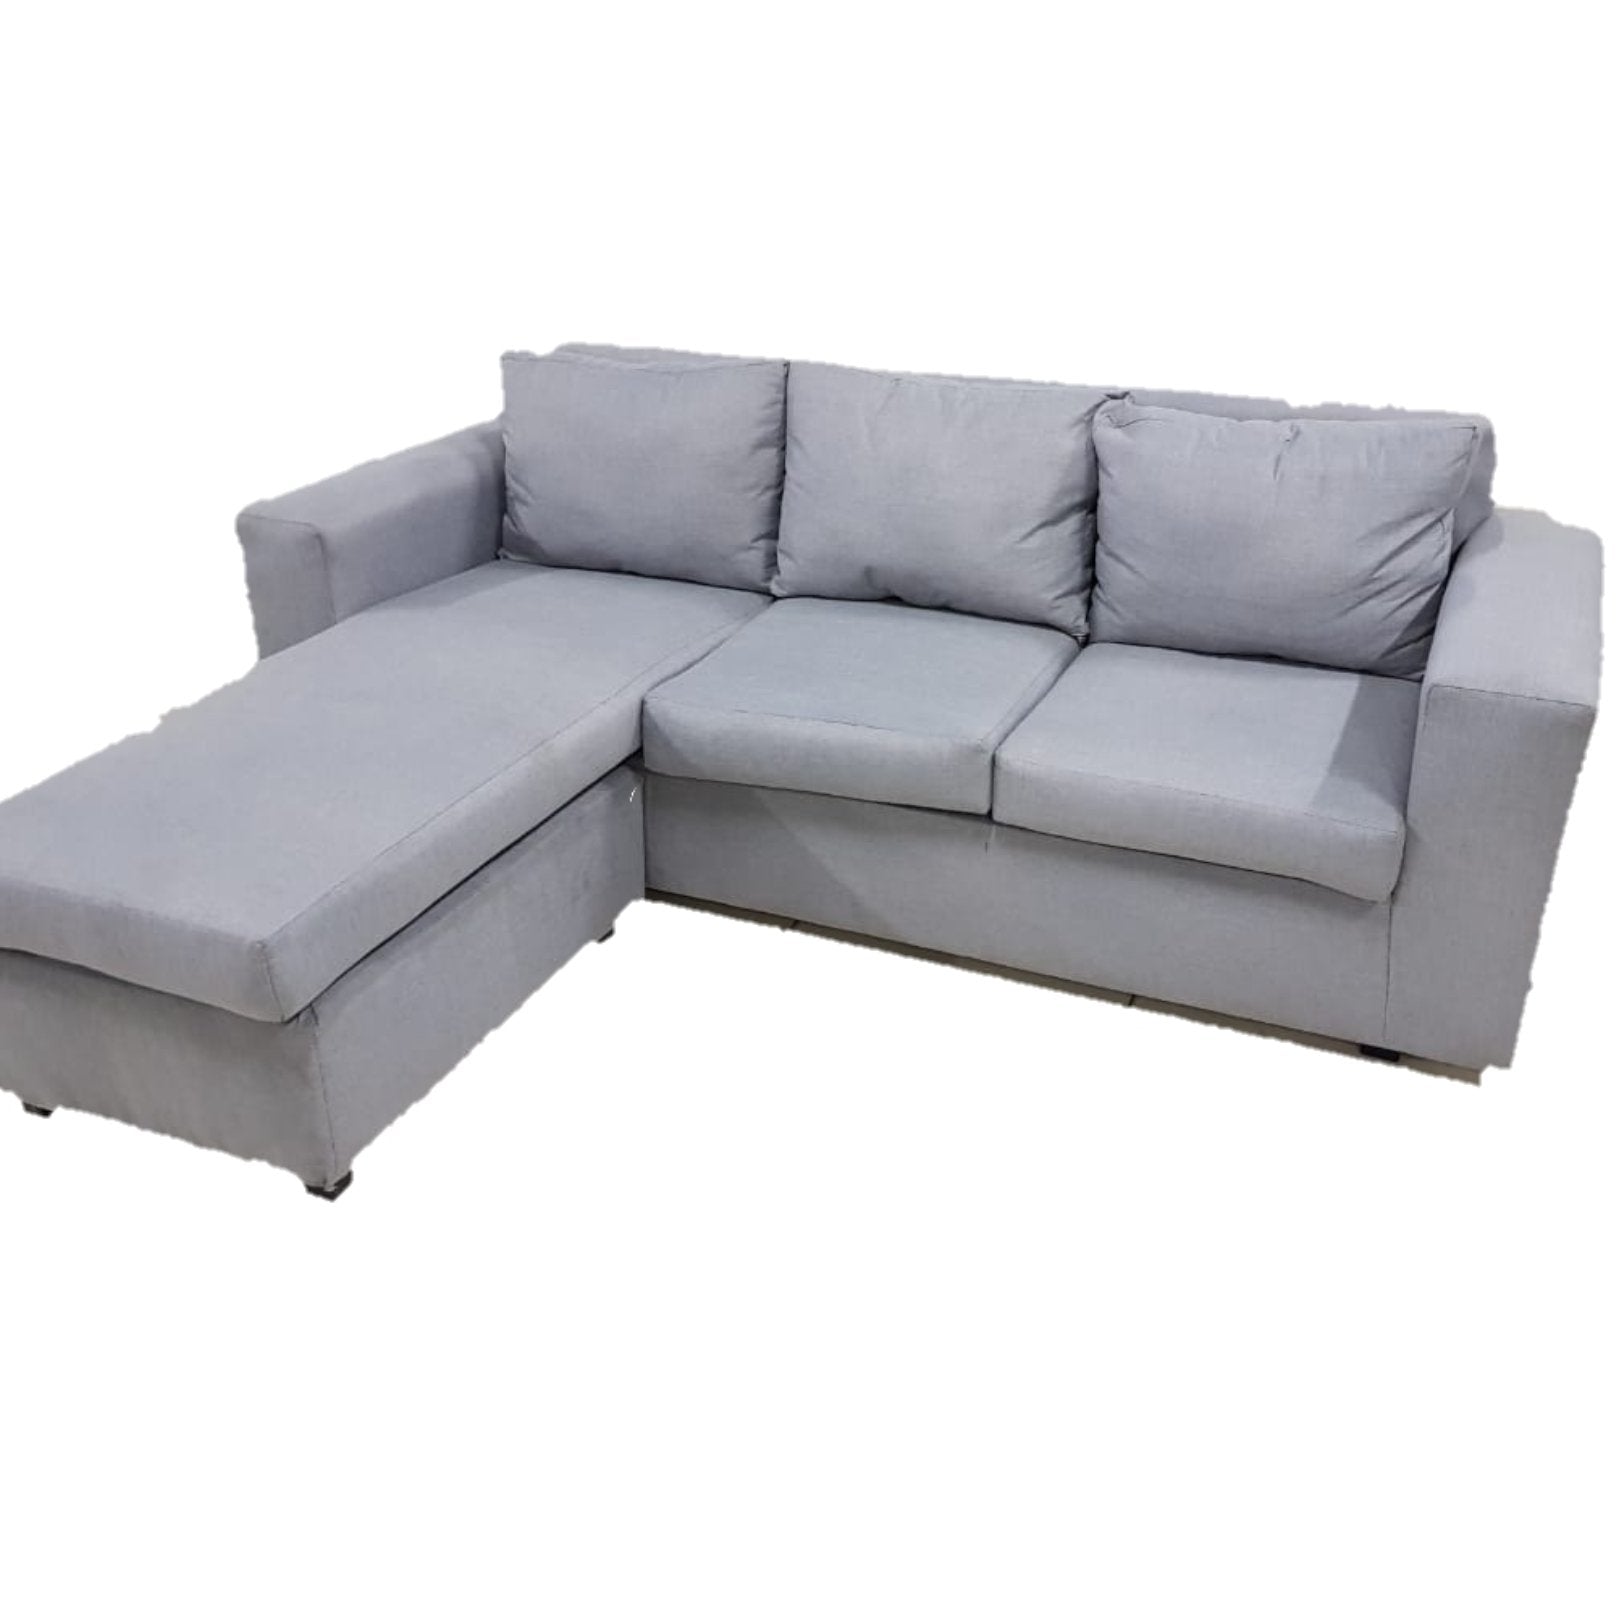 Corner Couch (Universal) - That Couch Place